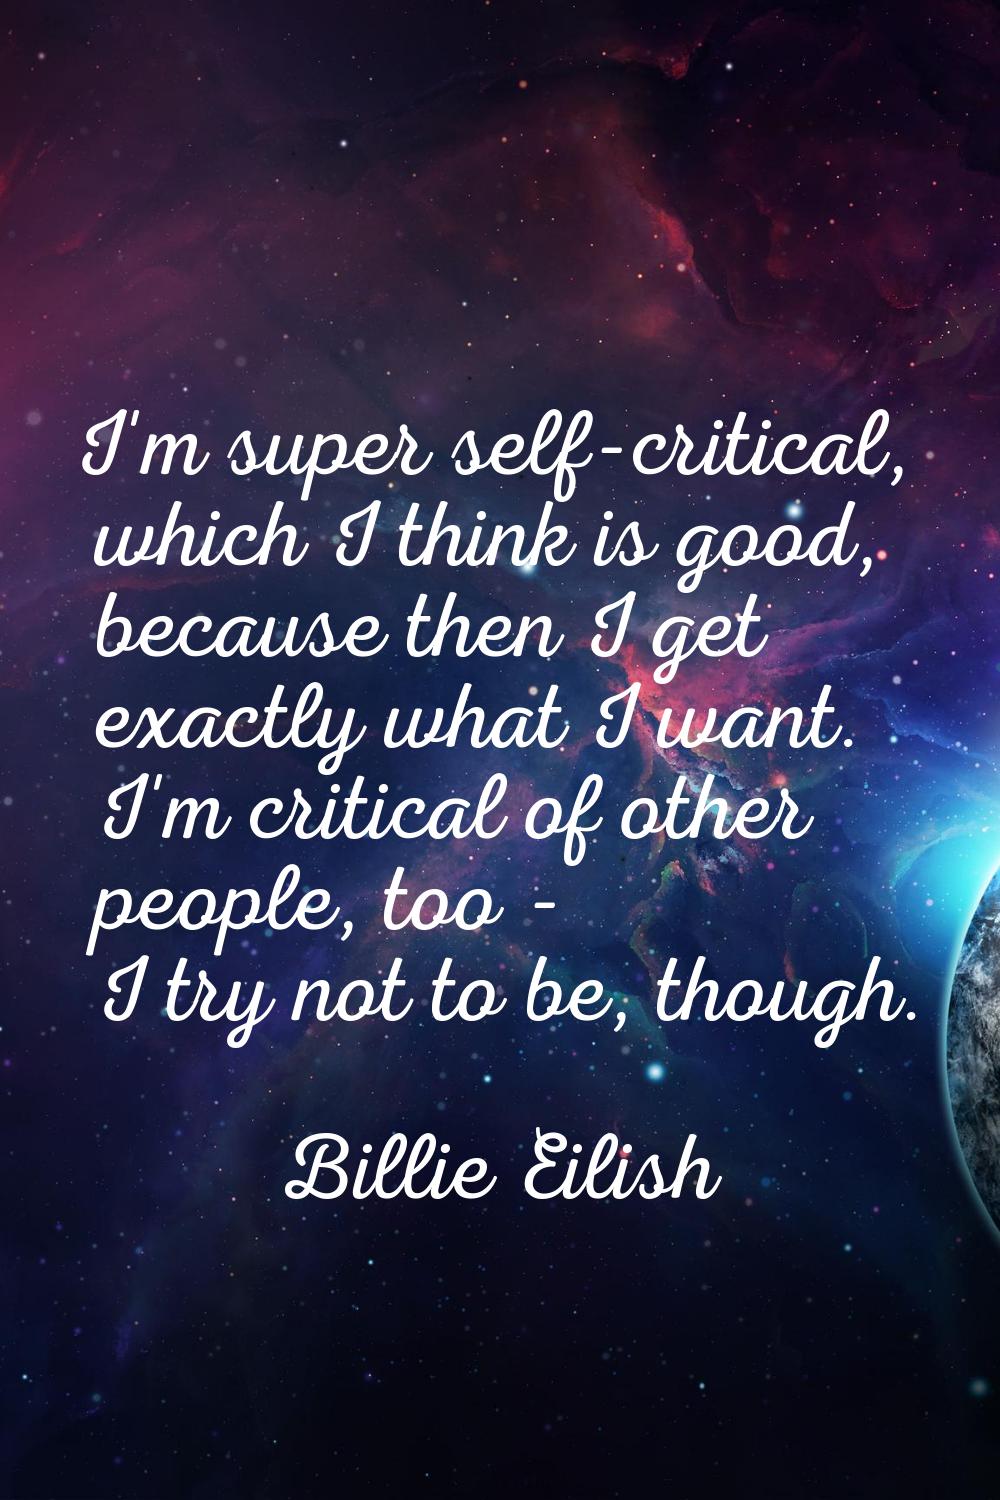 I'm super self-critical, which I think is good, because then I get exactly what I want. I'm critica